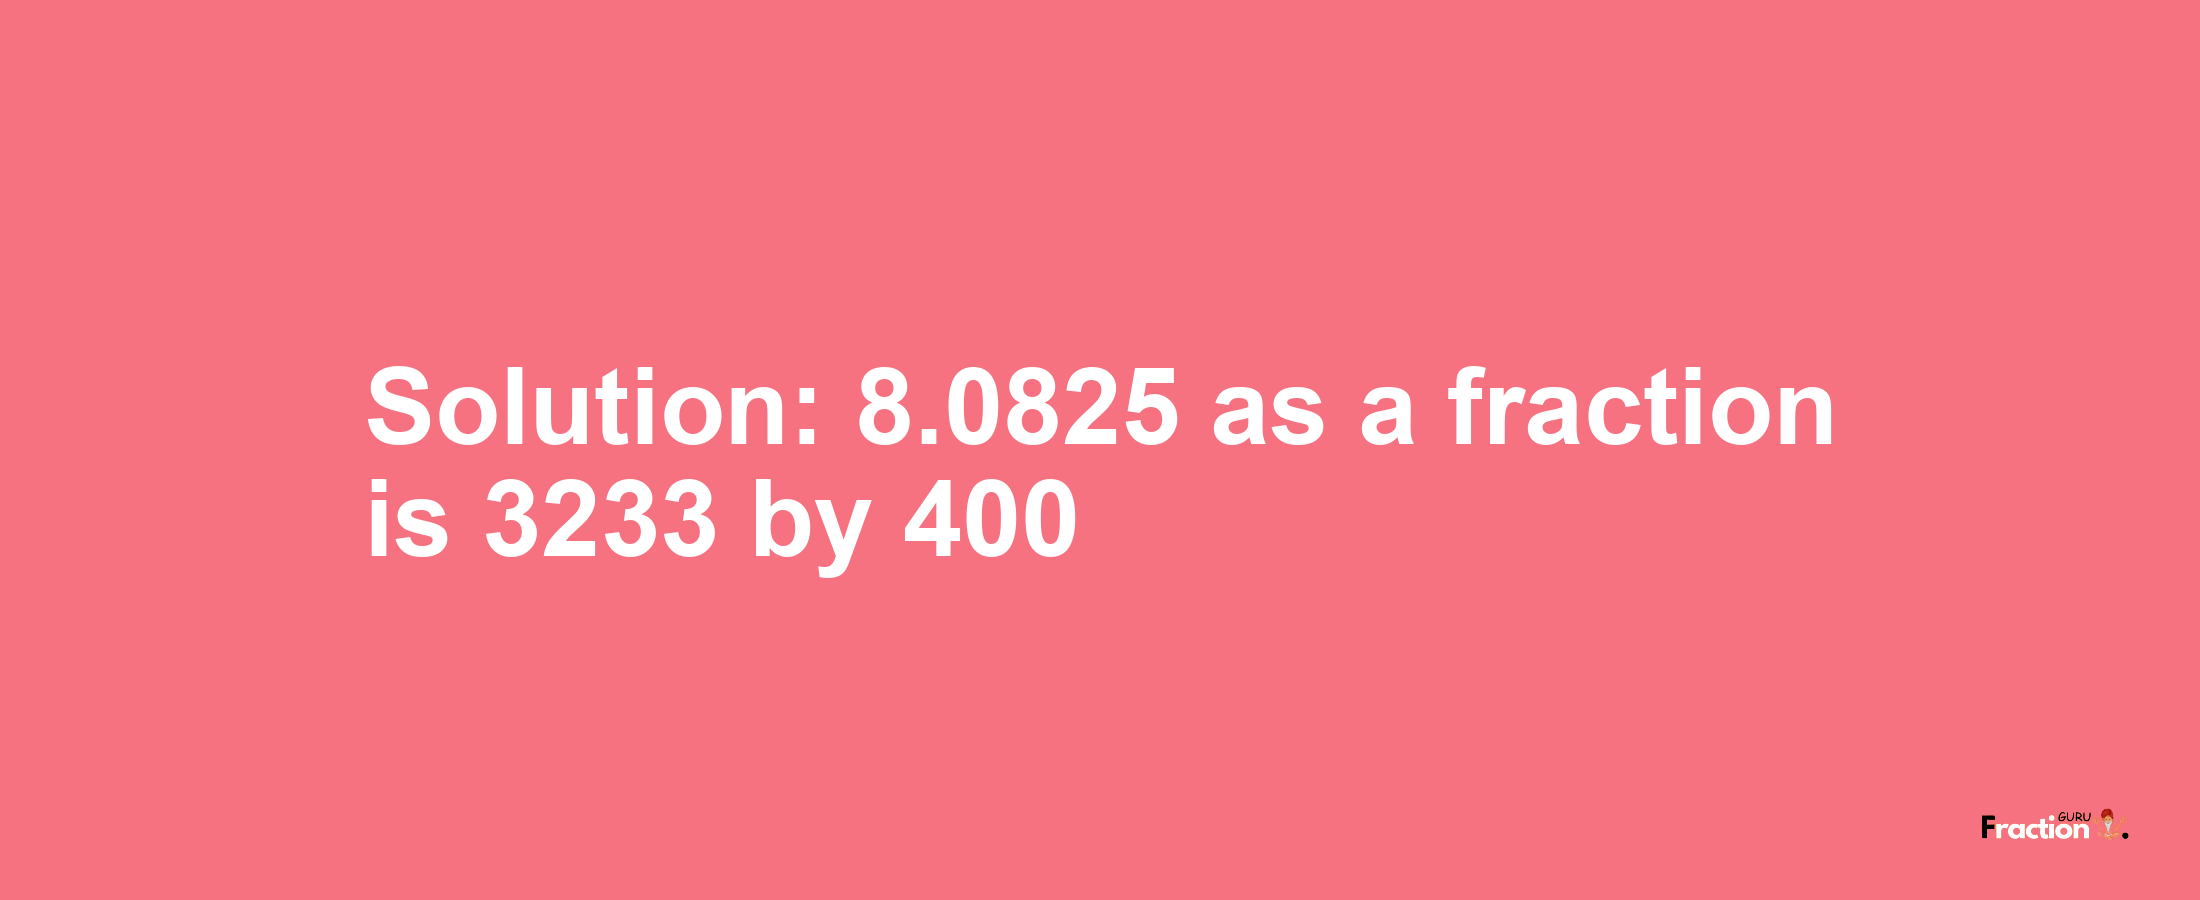 Solution:8.0825 as a fraction is 3233/400